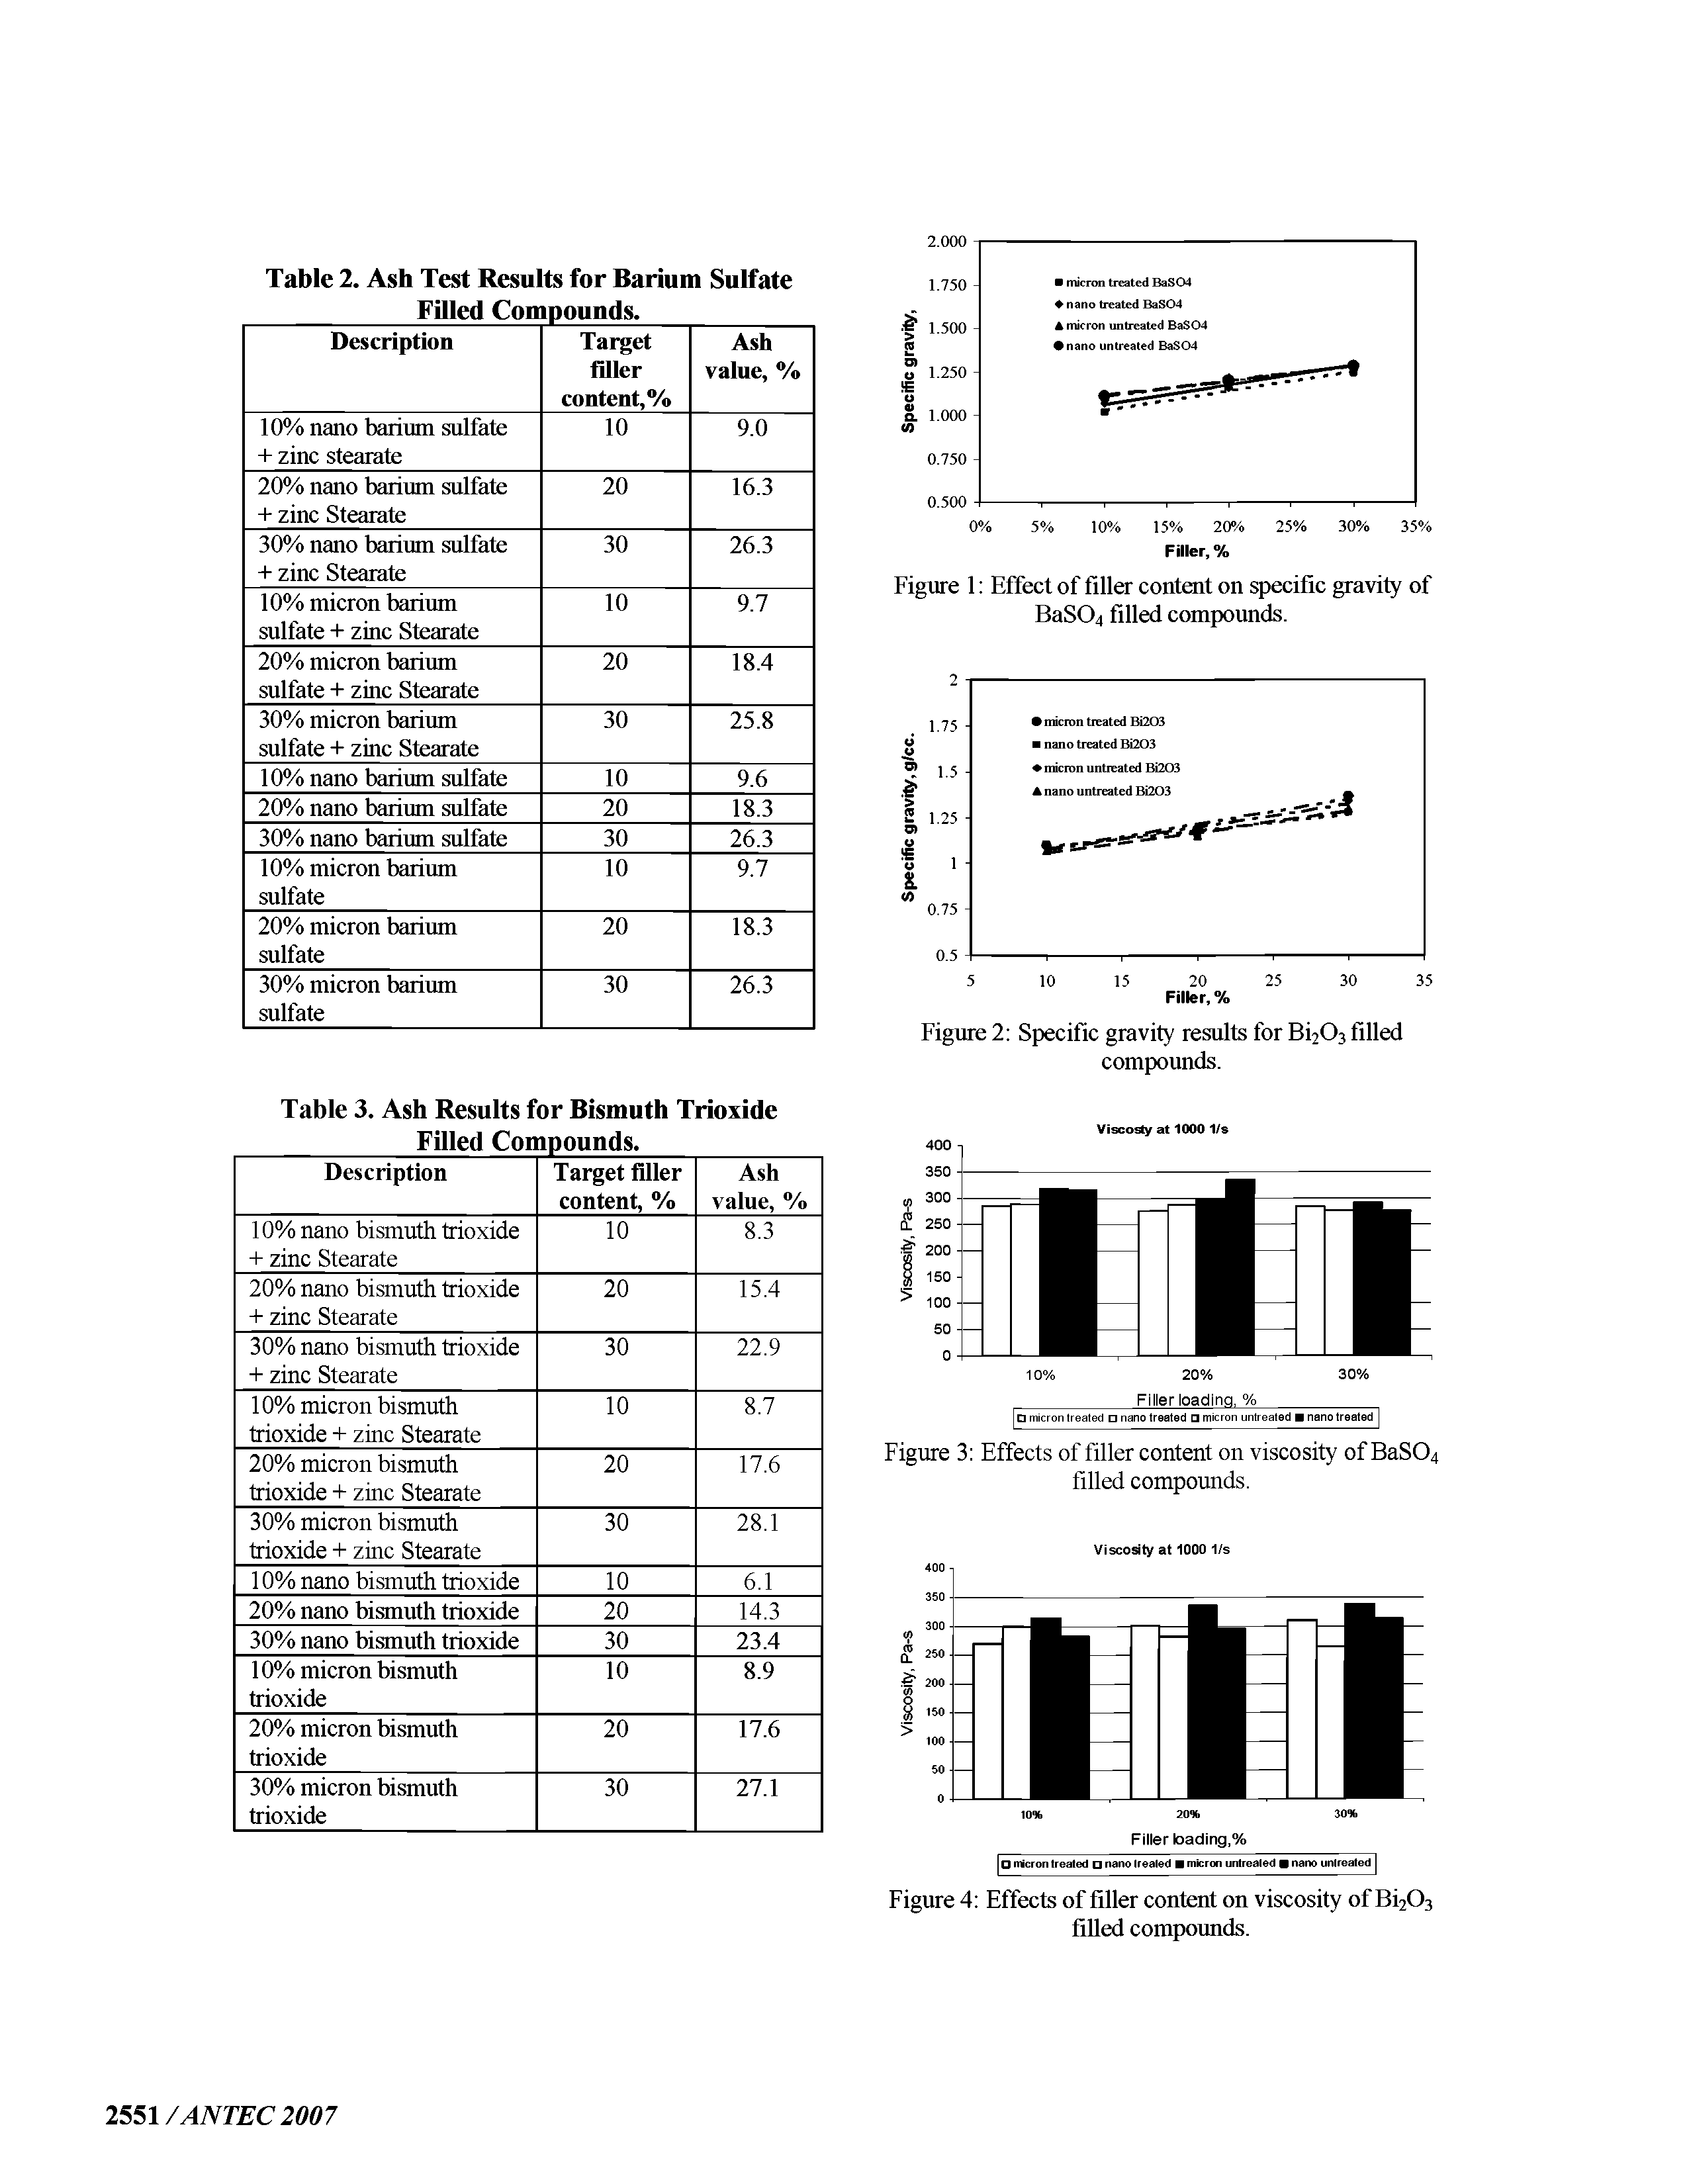 Figure 2 Specific gravity results for Bi203 filled compounds.